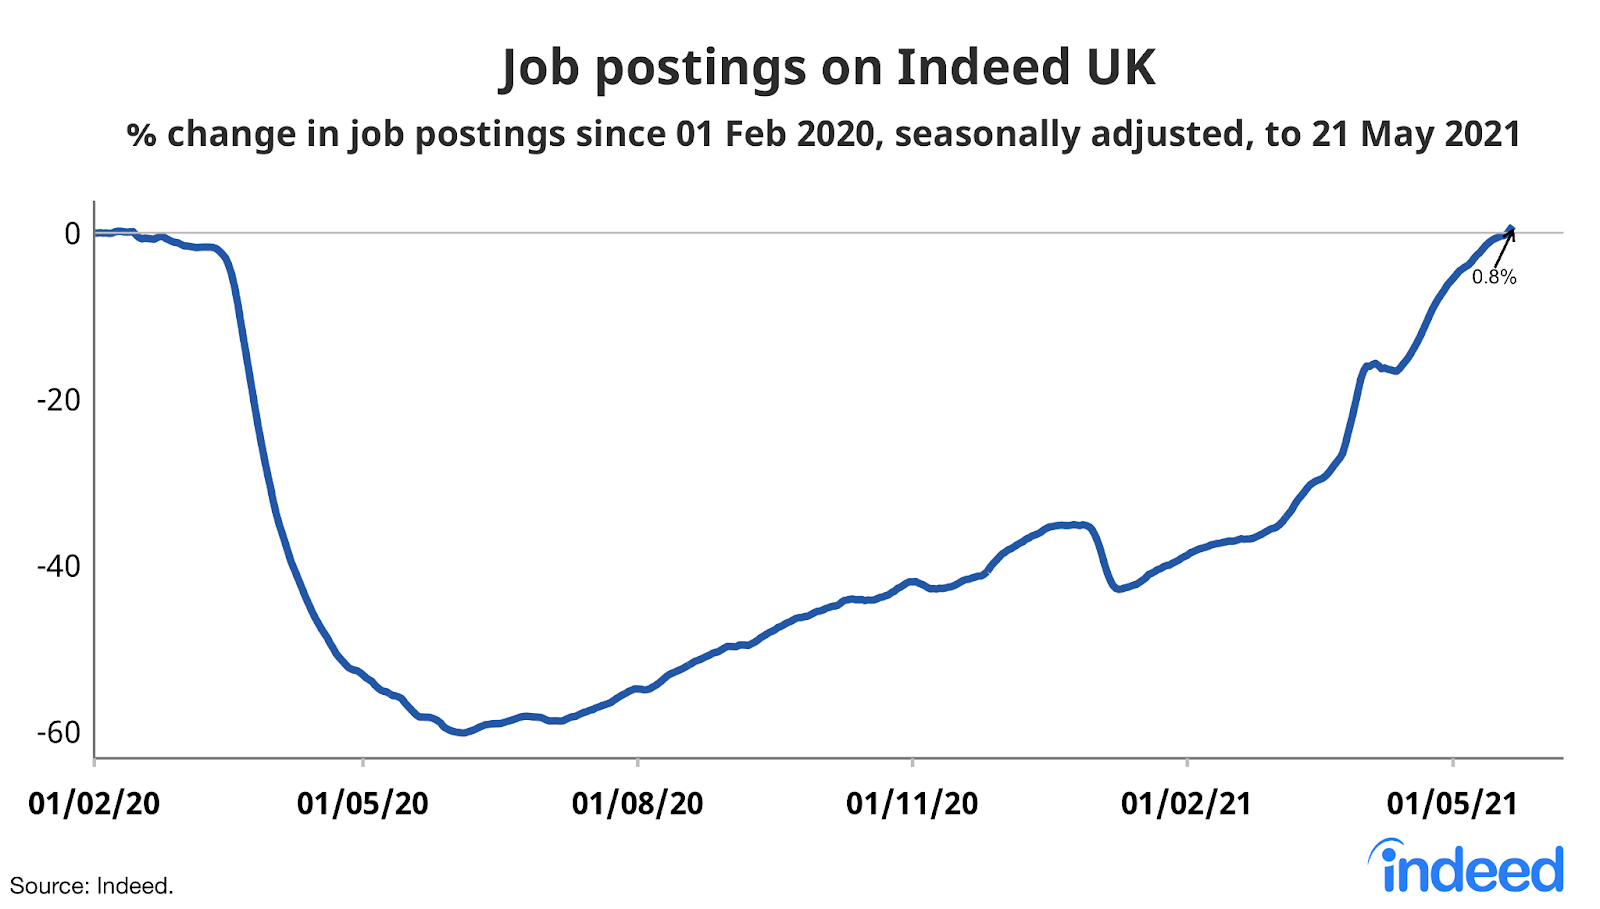 Line graph showing job postings on Indeed UK